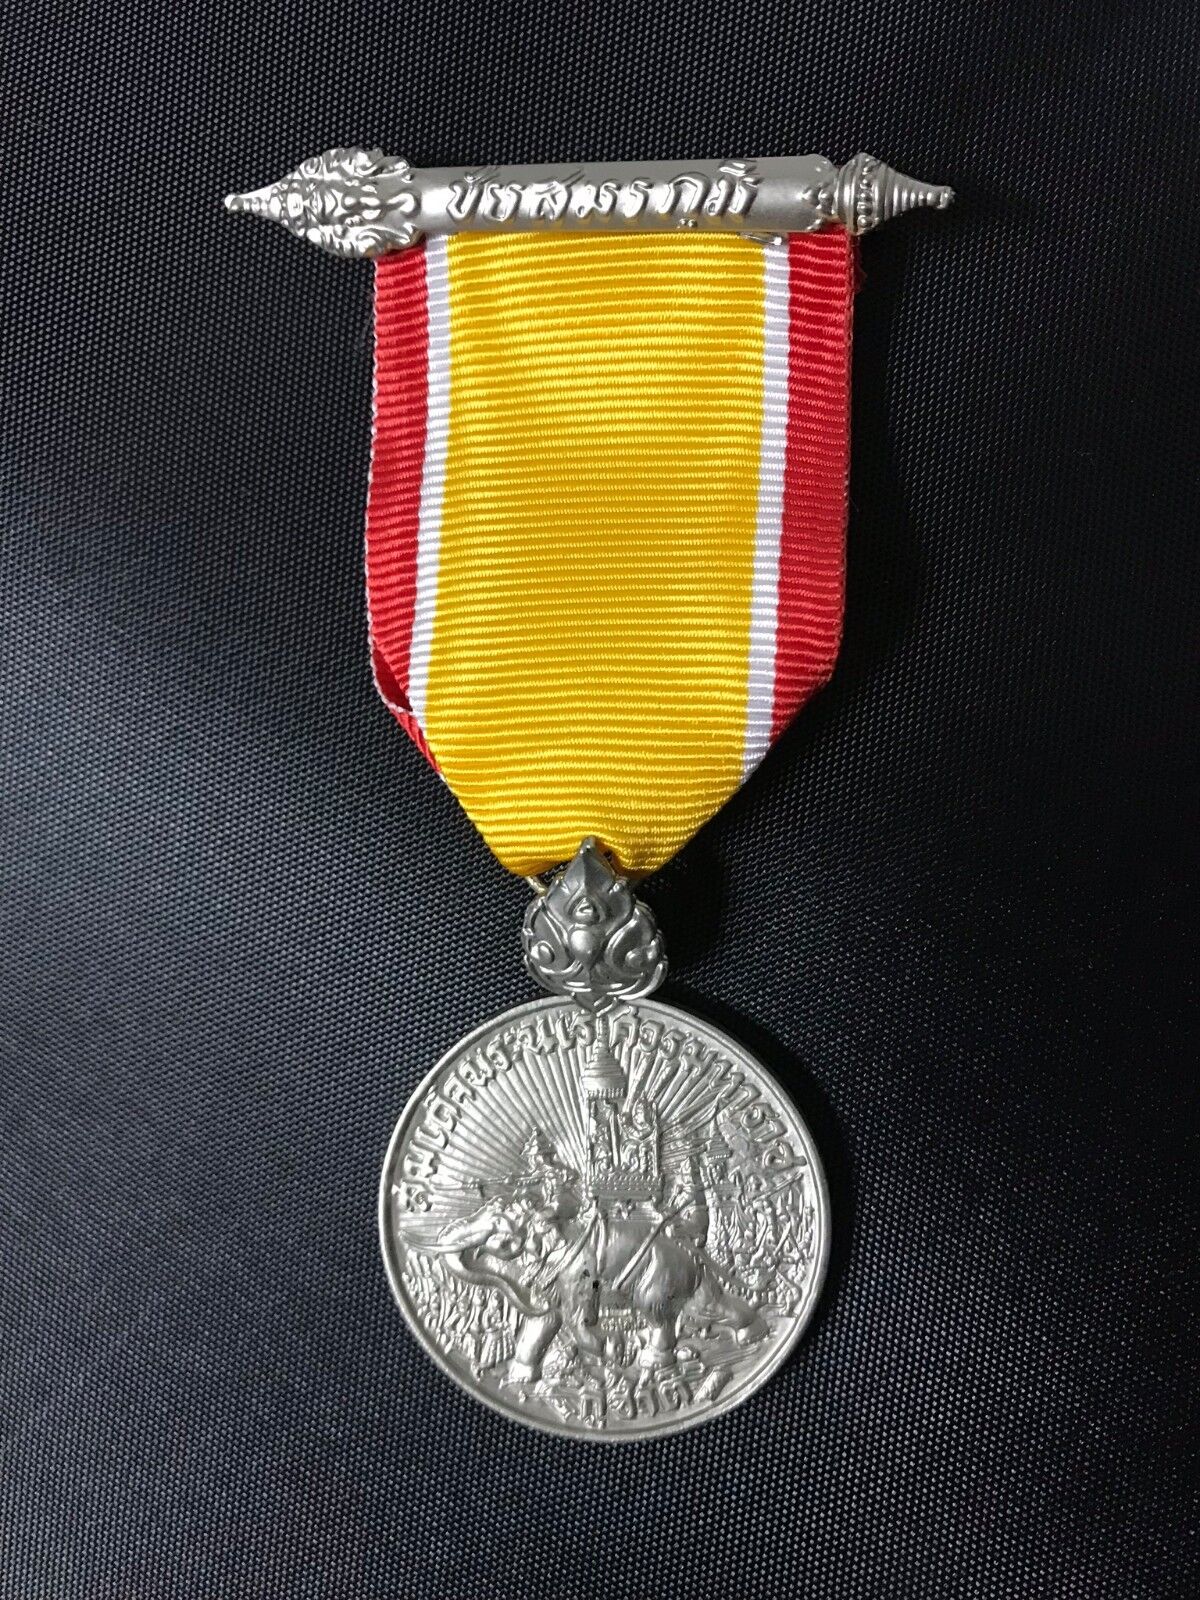 THAILAND VICTORY MEDAL DURING THE WAR AT VIETNAM